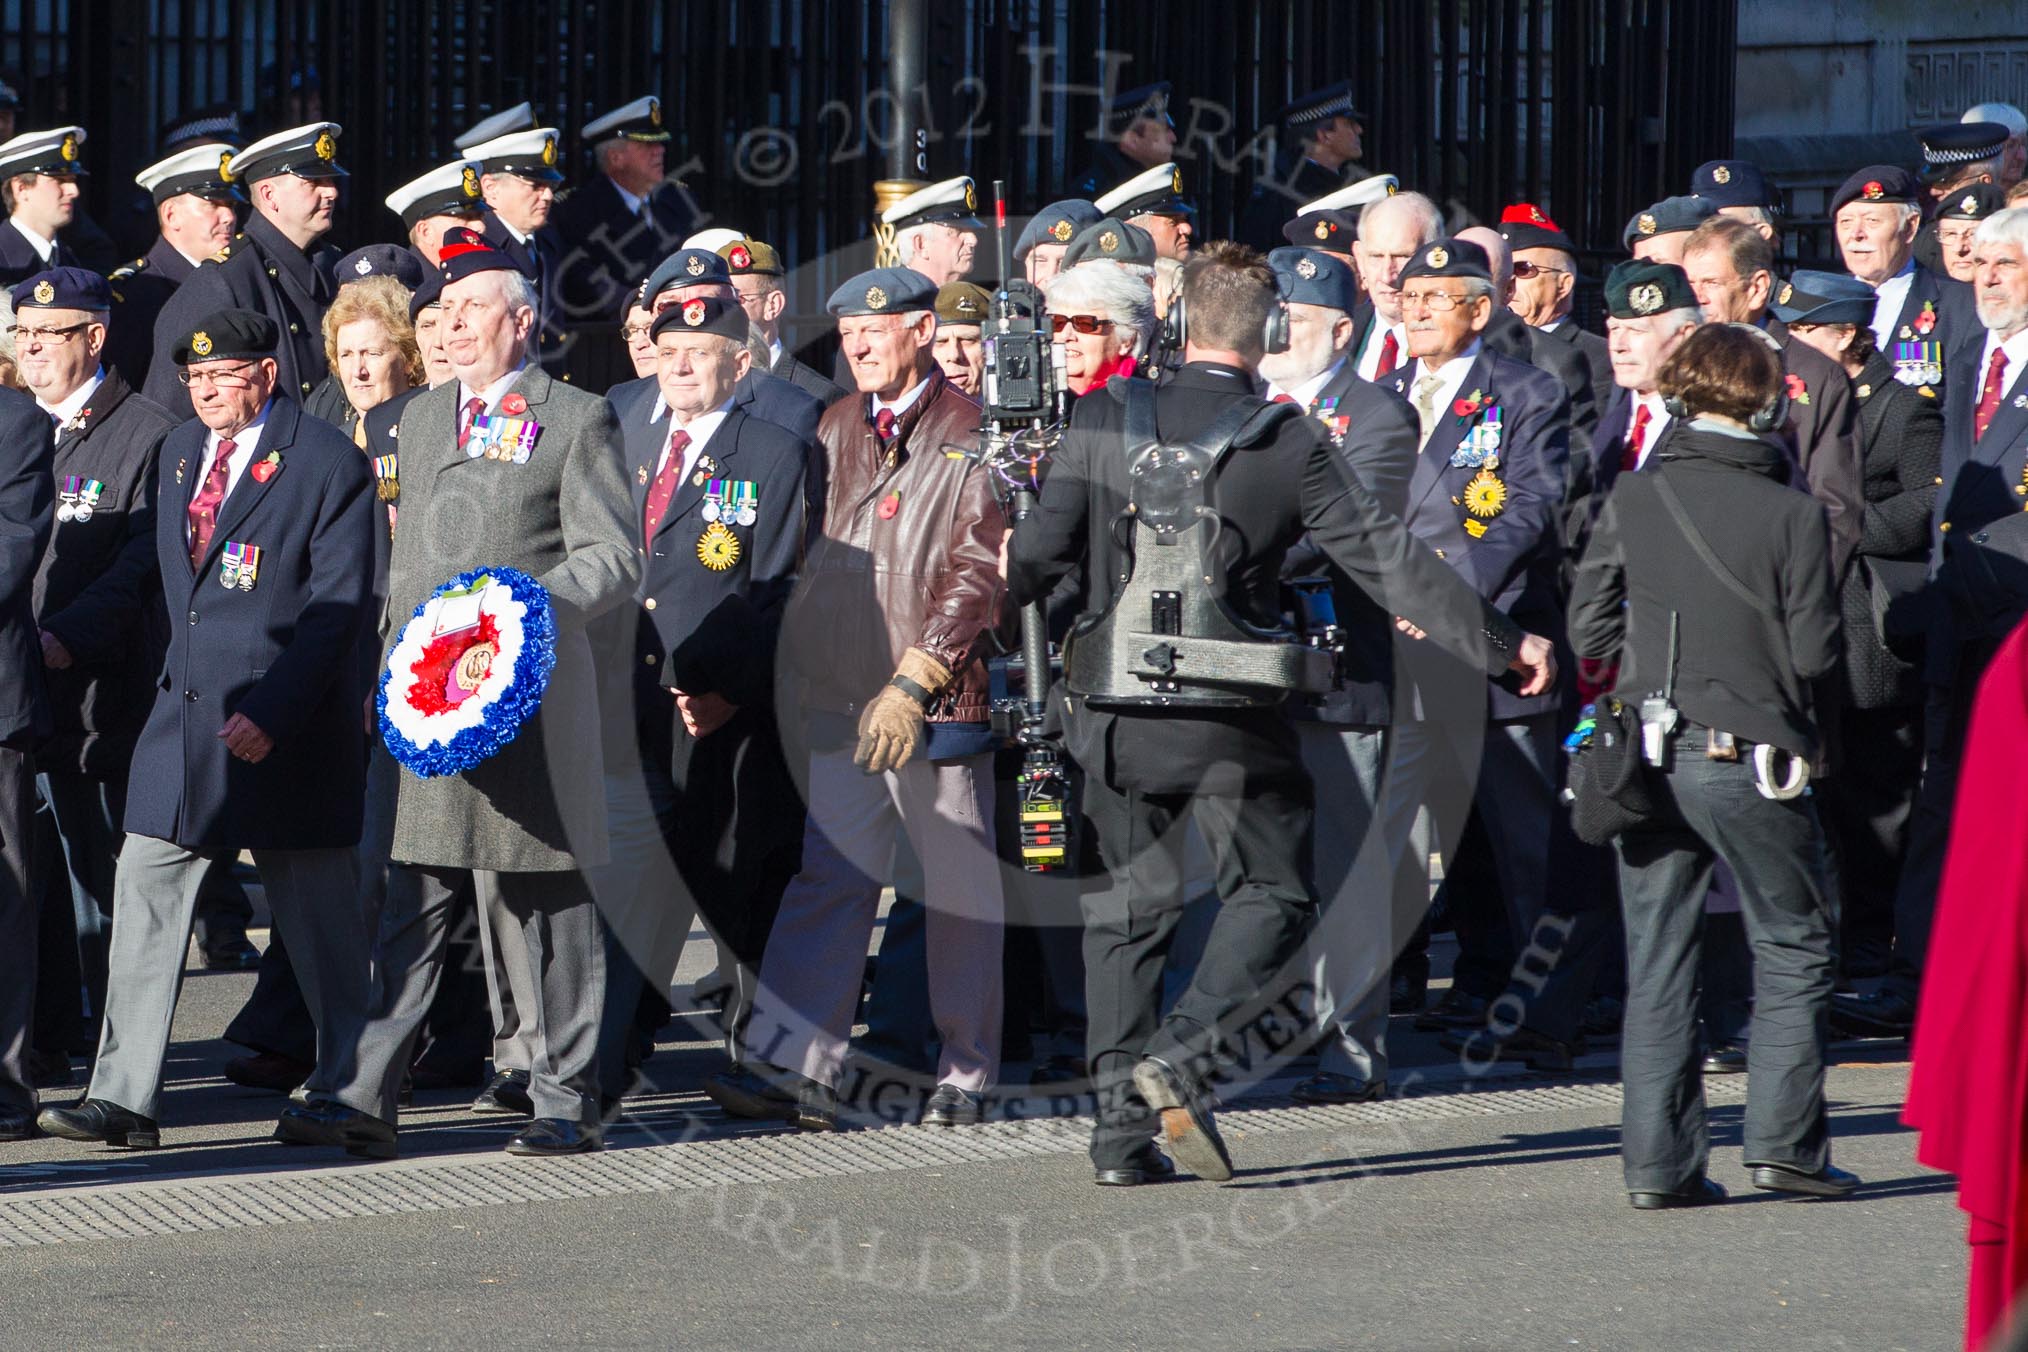 Remembrance Sunday 2012 Cenotaph March Past: Group F2 - Aden Veterans Association..
Whitehall, Cenotaph,
London SW1,

United Kingdom,
on 11 November 2012 at 11:44, image #386